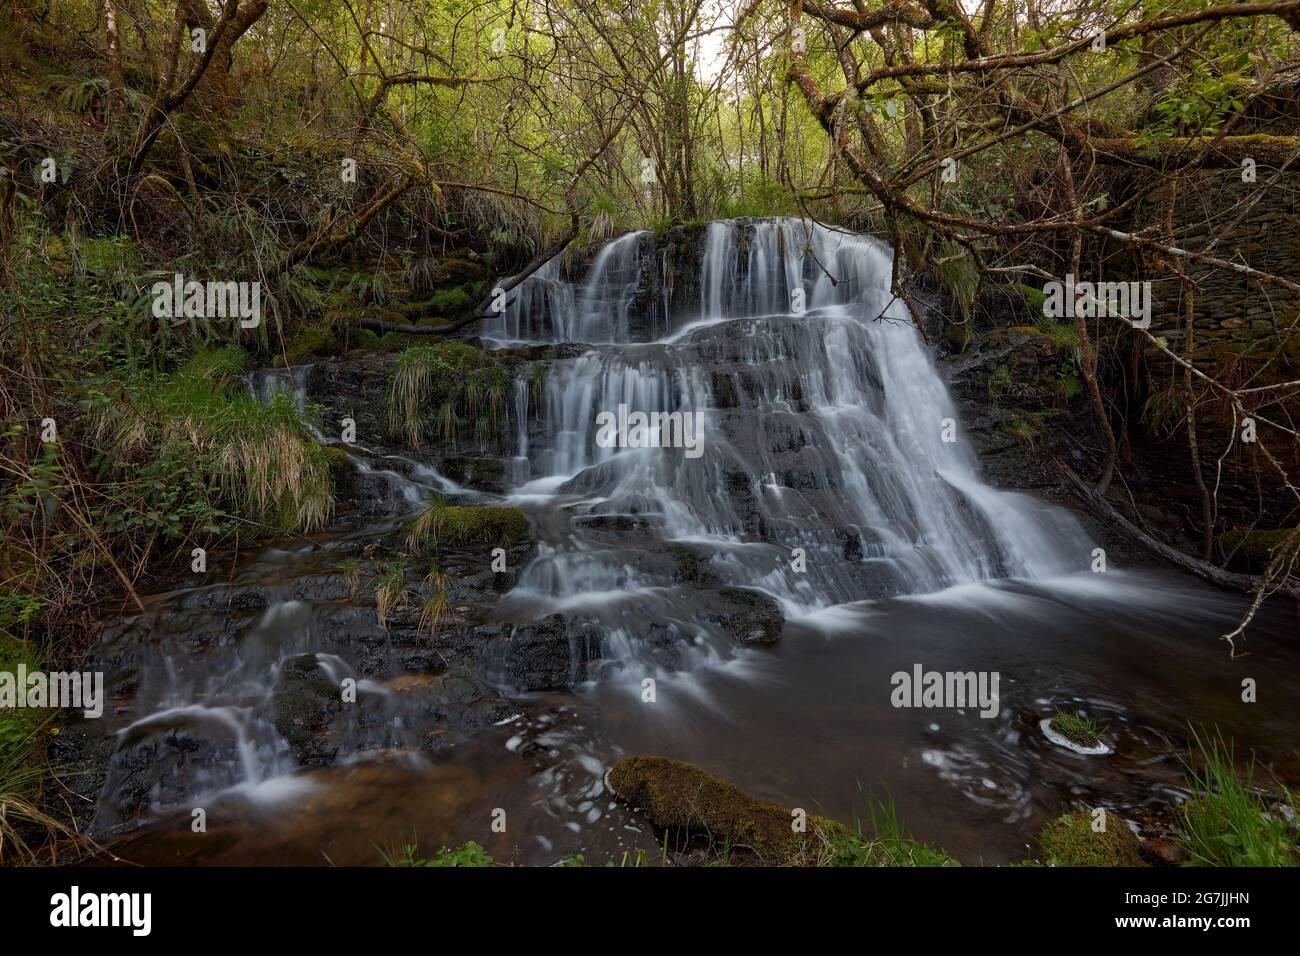 Waterfall in a beautiful forest in the area of Galicia, Spain Stock Photo